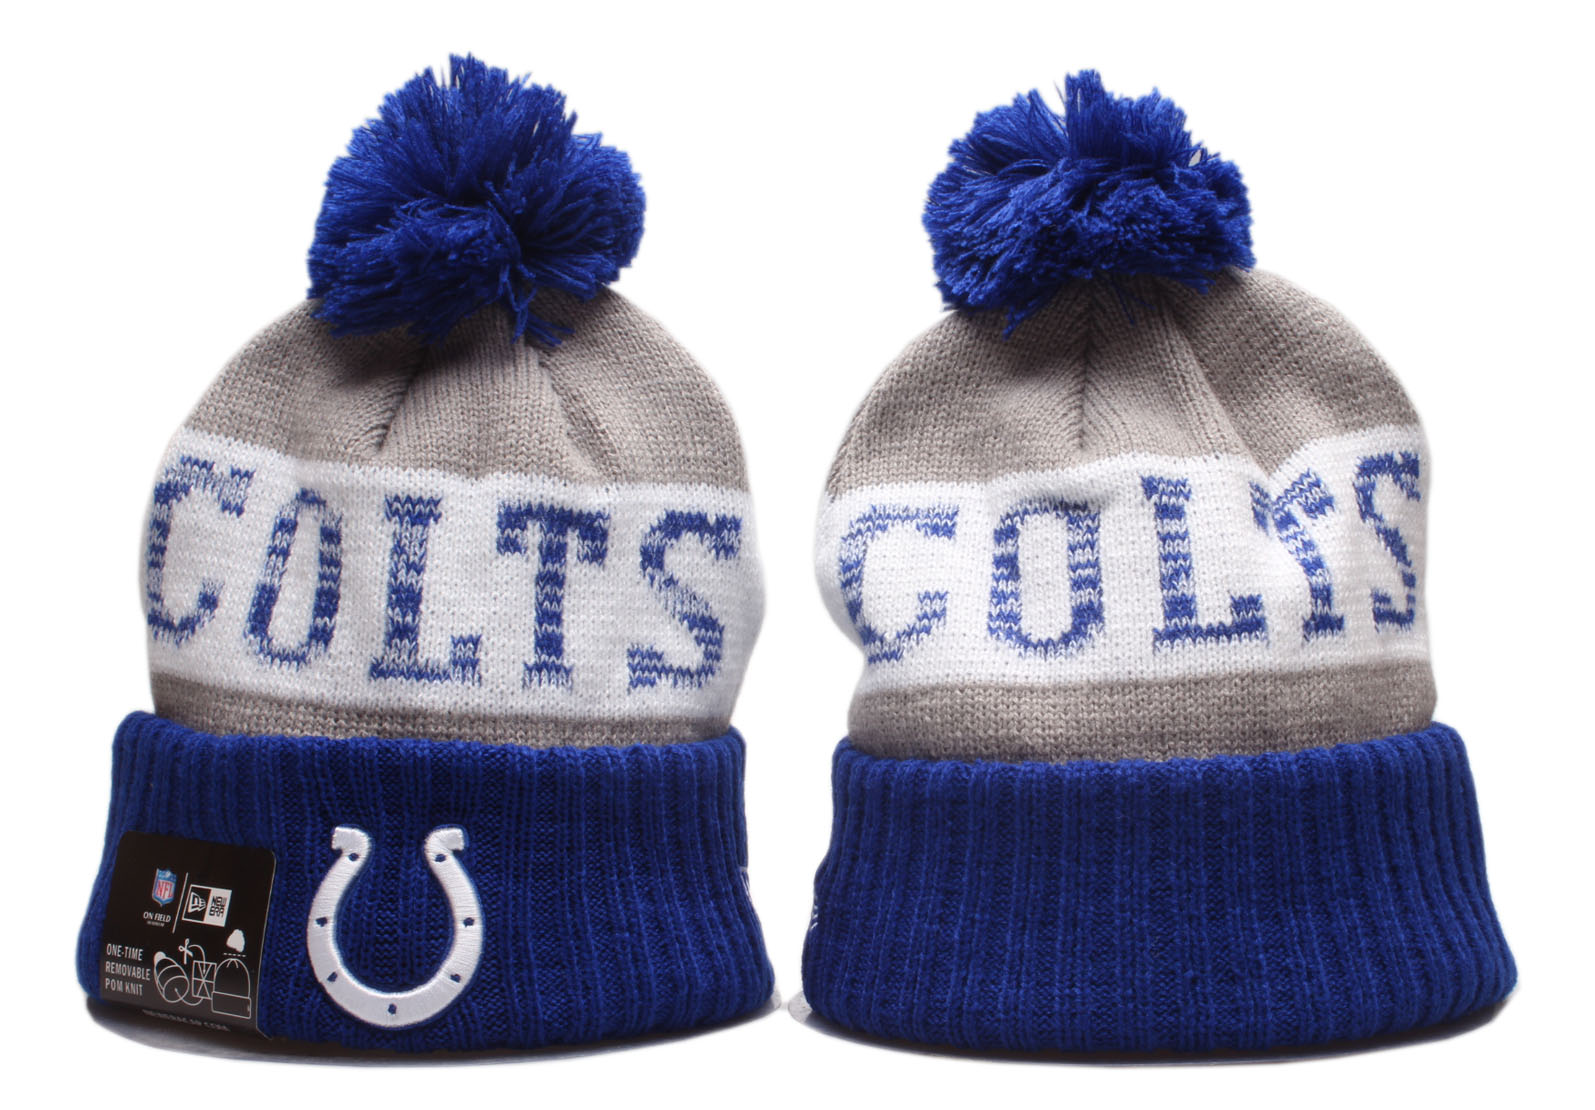 2020 NFL INDIANAPOLIS COLTS 02